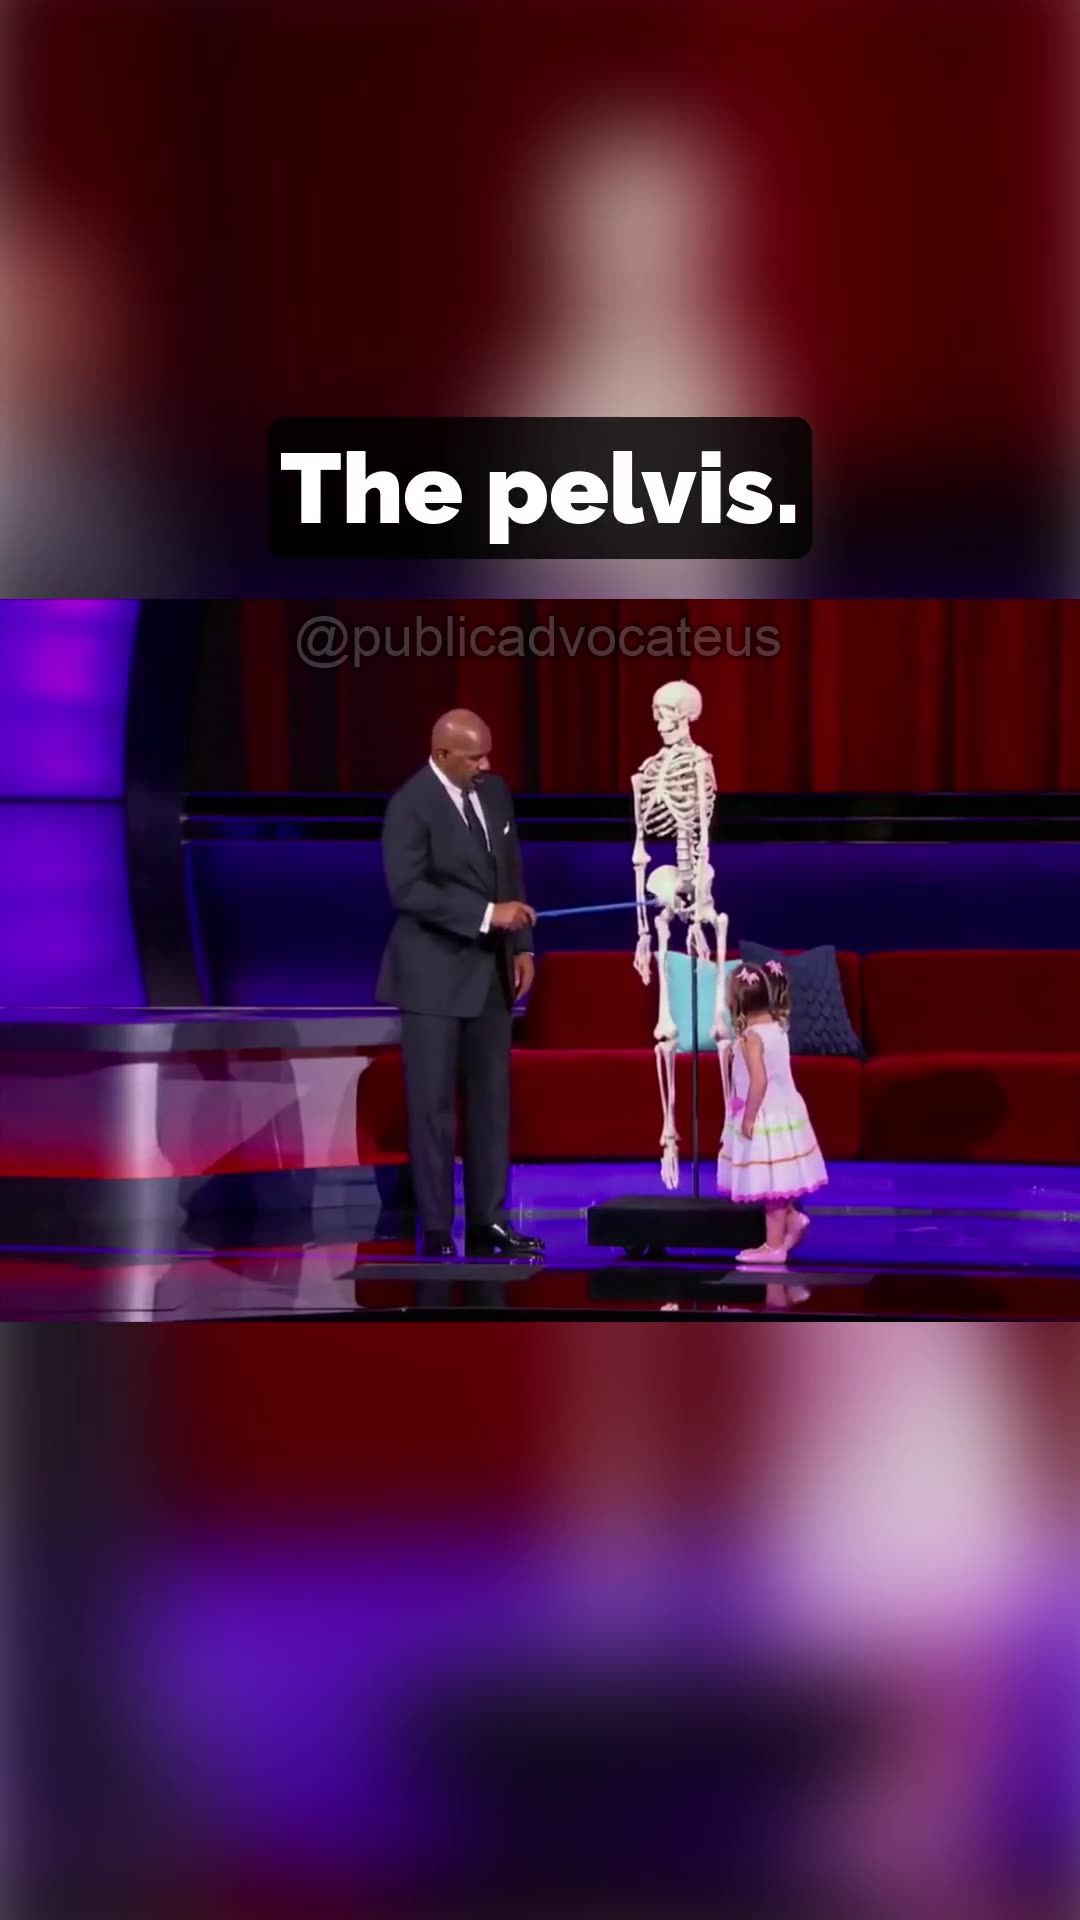 Little Girl on bones. Now that is Real Science! #facts #cute #lol #bones